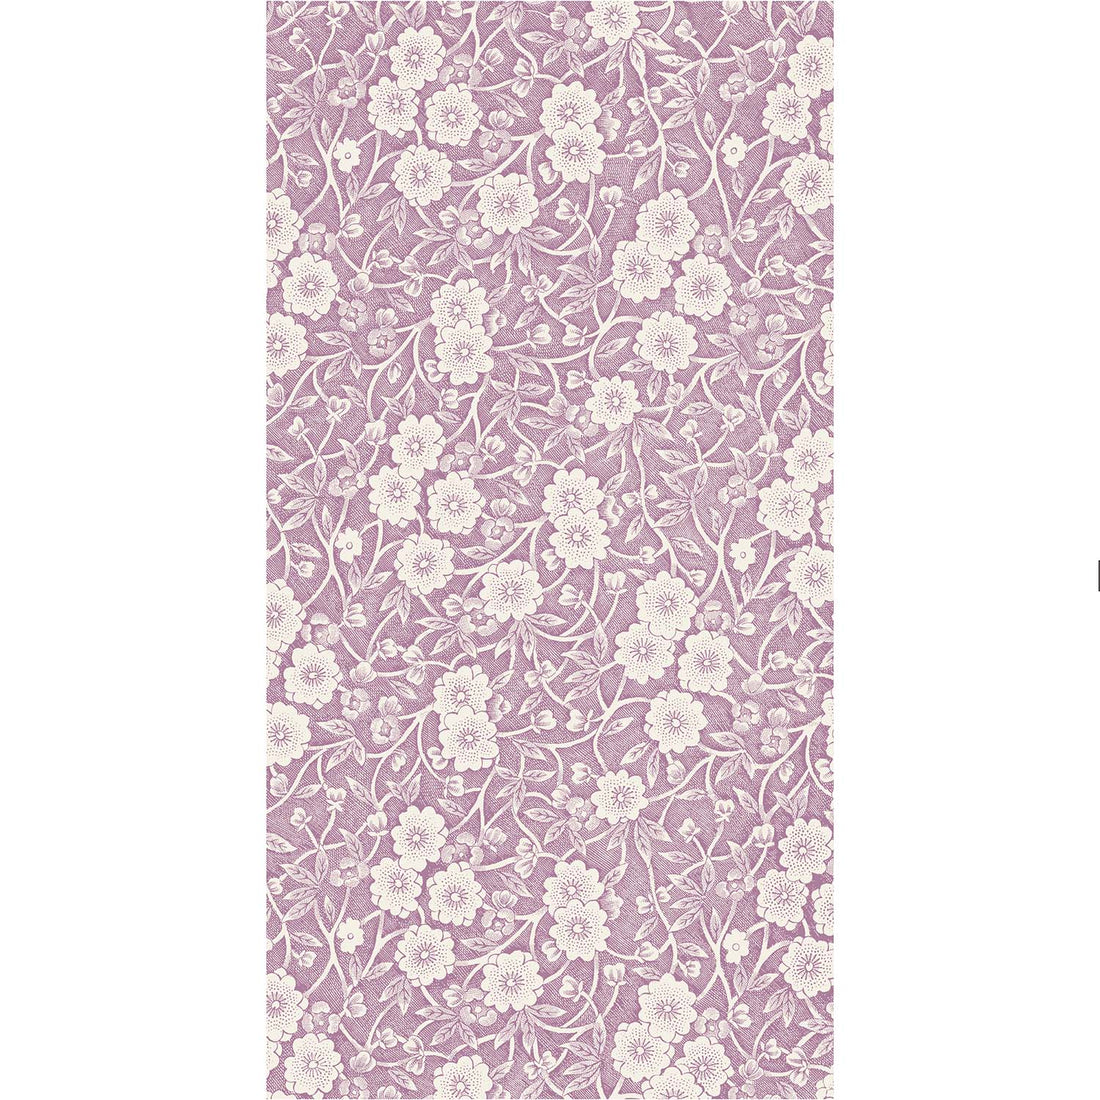 A rectangle guest napkin featuring a dense pattern of white flowers, stems and leaves on a lilac purple background.